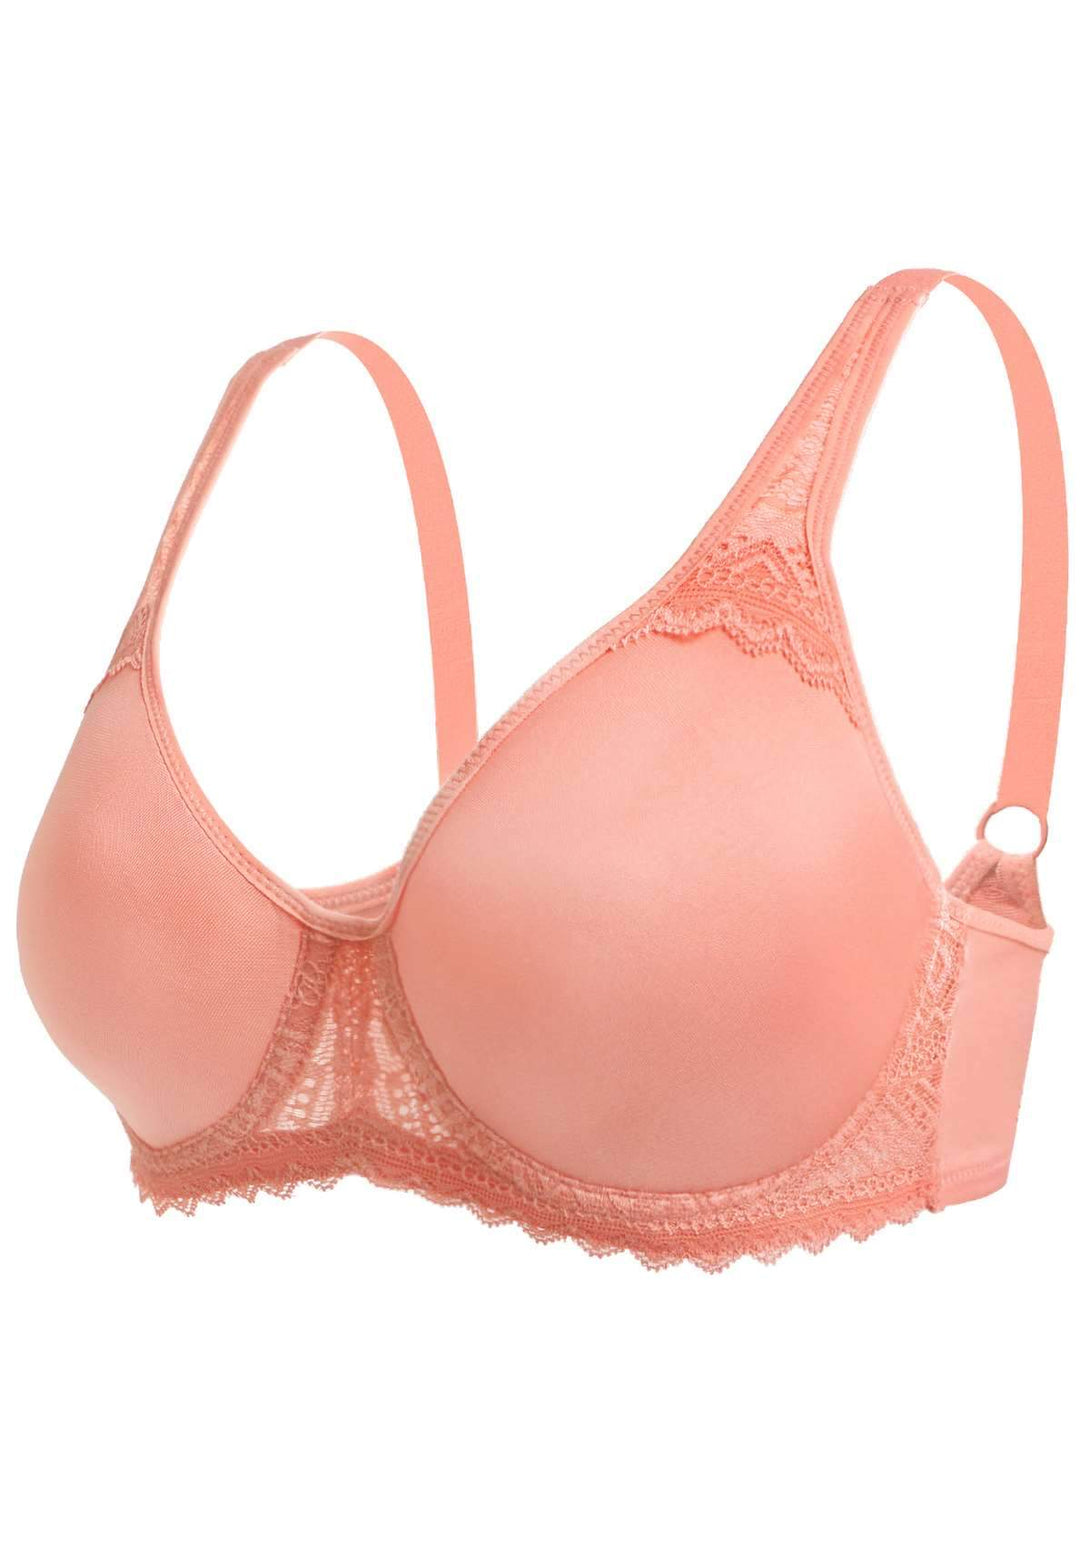 HSIA Lace Affair Padded Comfort Underwire Contour Bra